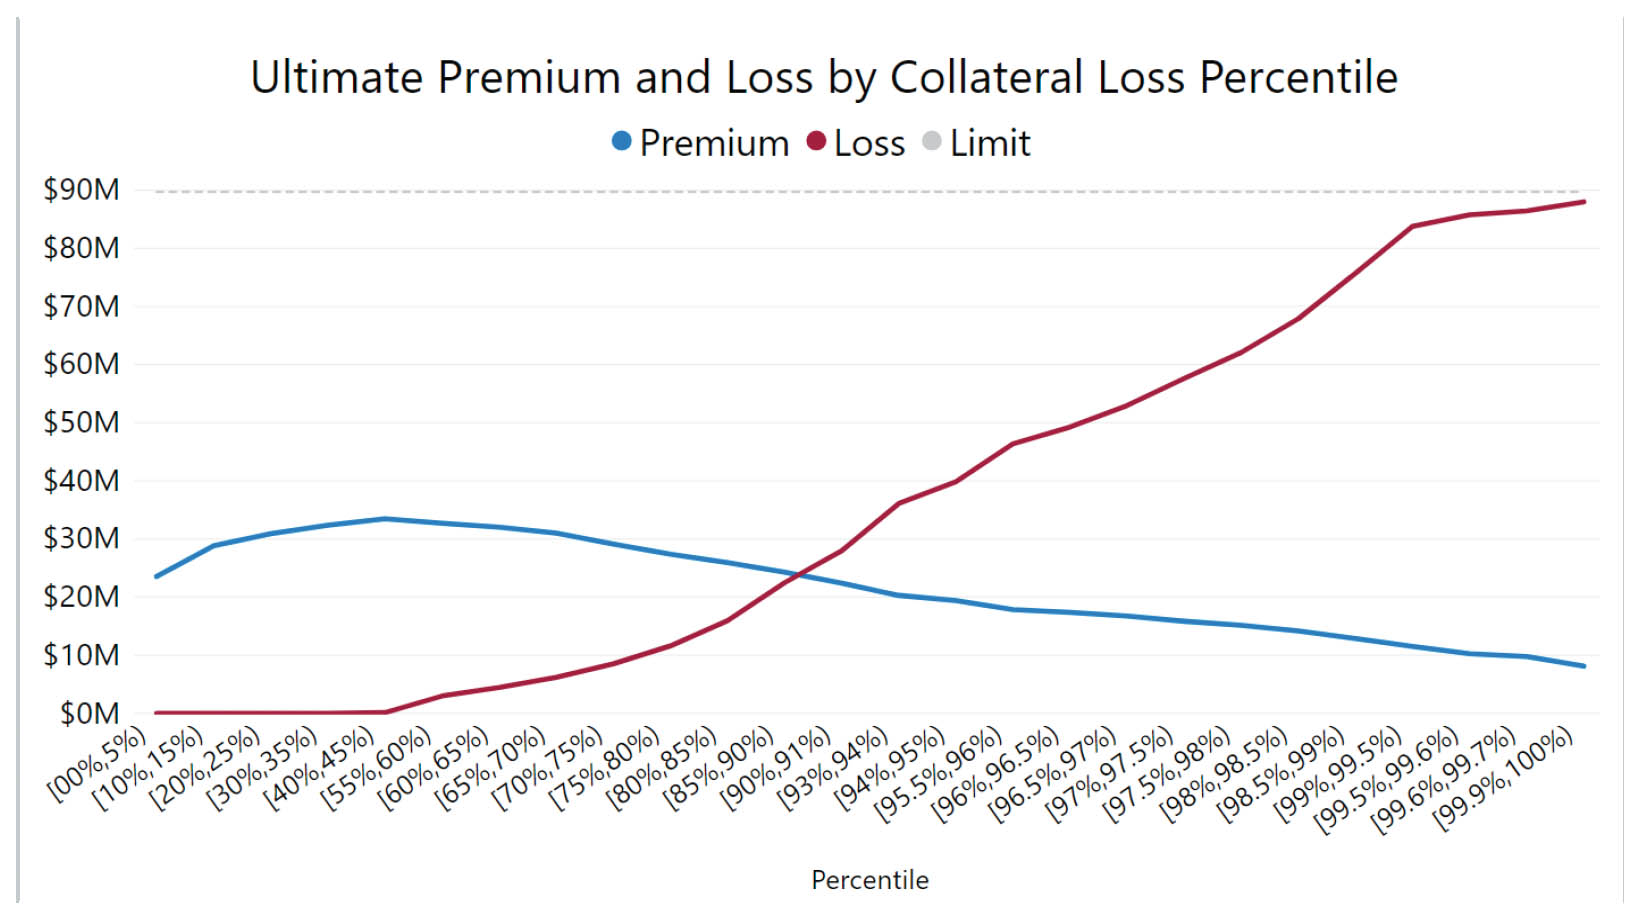 M-Pire Securitization Software, line graph of ultimate premium and loss by collateral loss percentile 